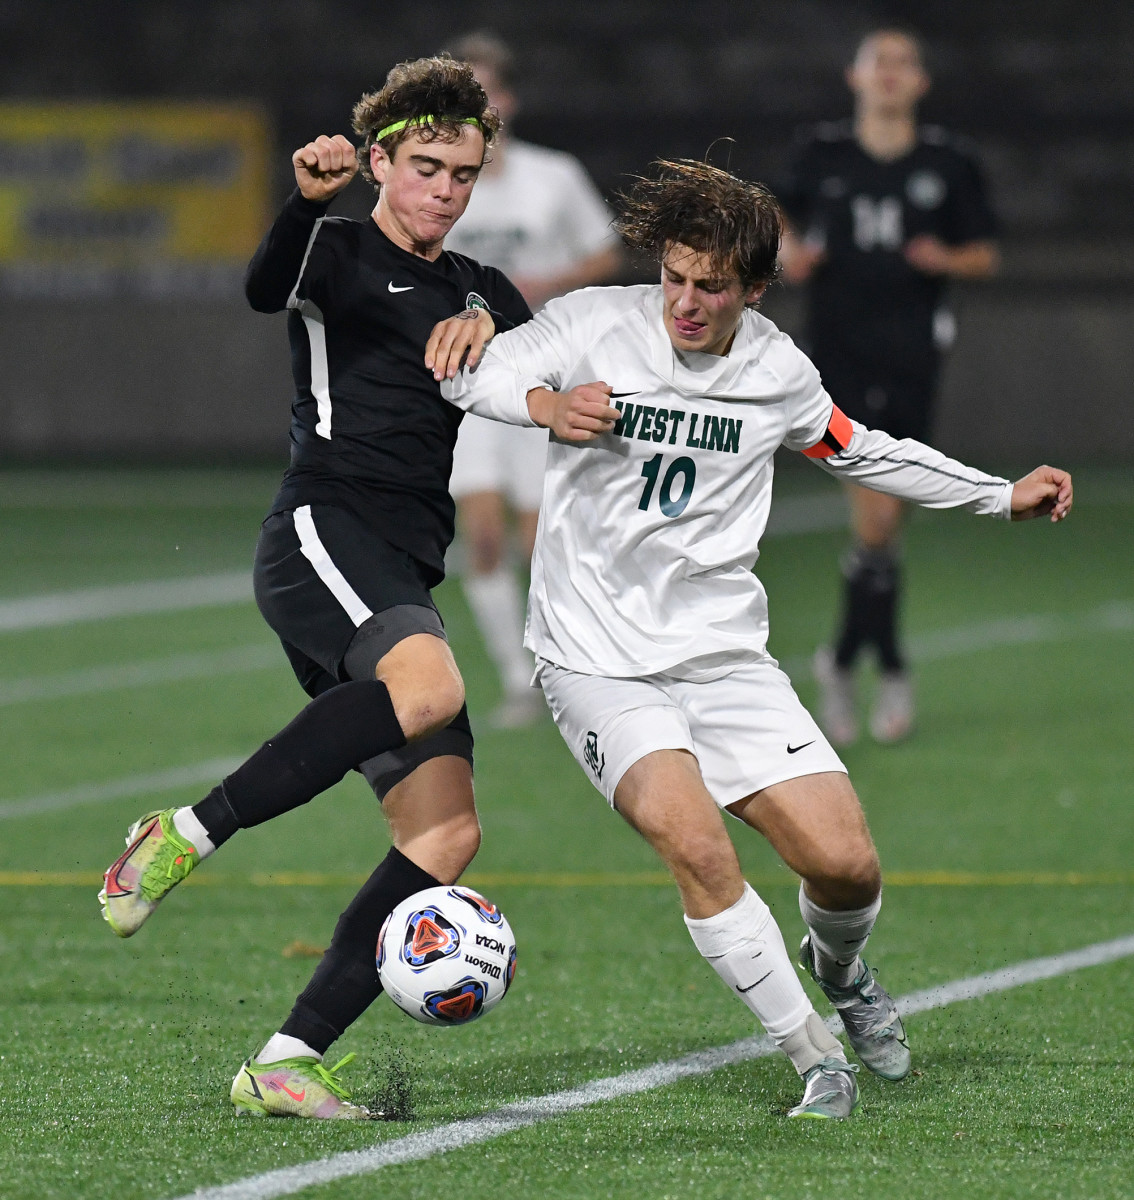 Summit junior Ben Evans, left, fights off West Linn senior Owen Caba on Saturday, Nov. 13, 2021, during the Storm’s 6-0 win against West Linn in the OSAA 6A Boy’s state championship game at Hillsboro Stadium in Hillsboro.